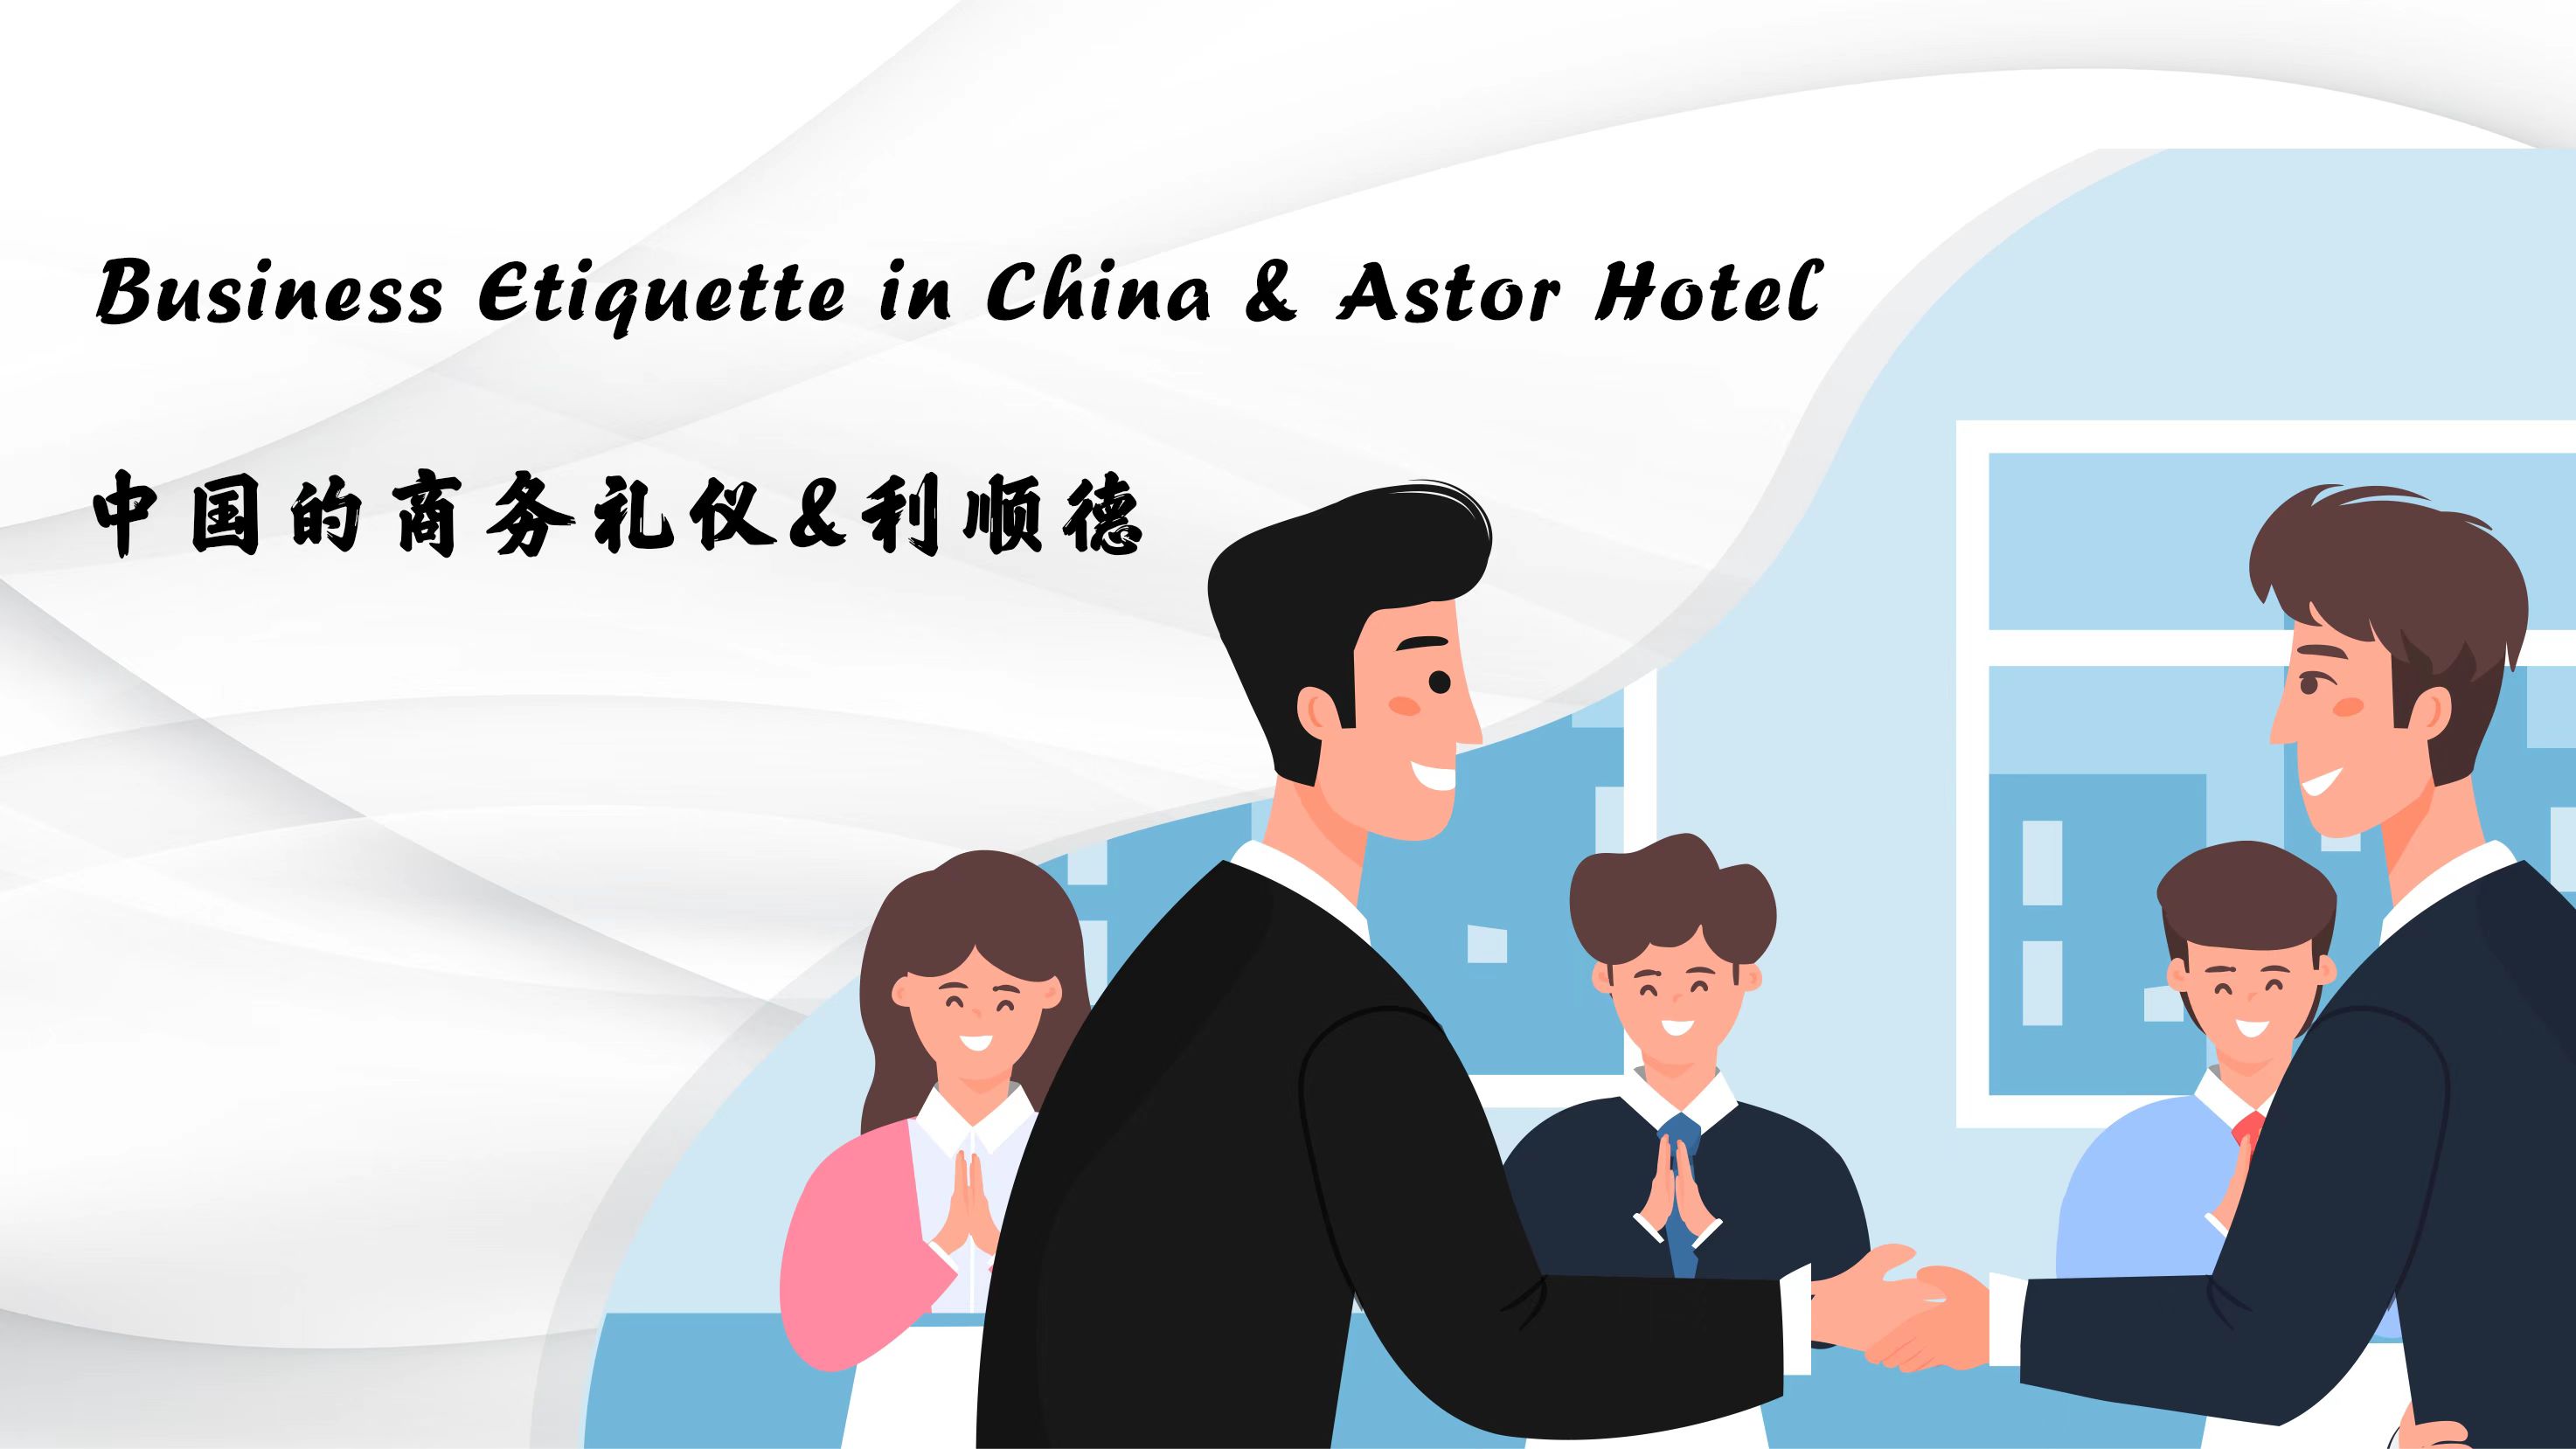 Business Etiquette in China & Astor Hotel